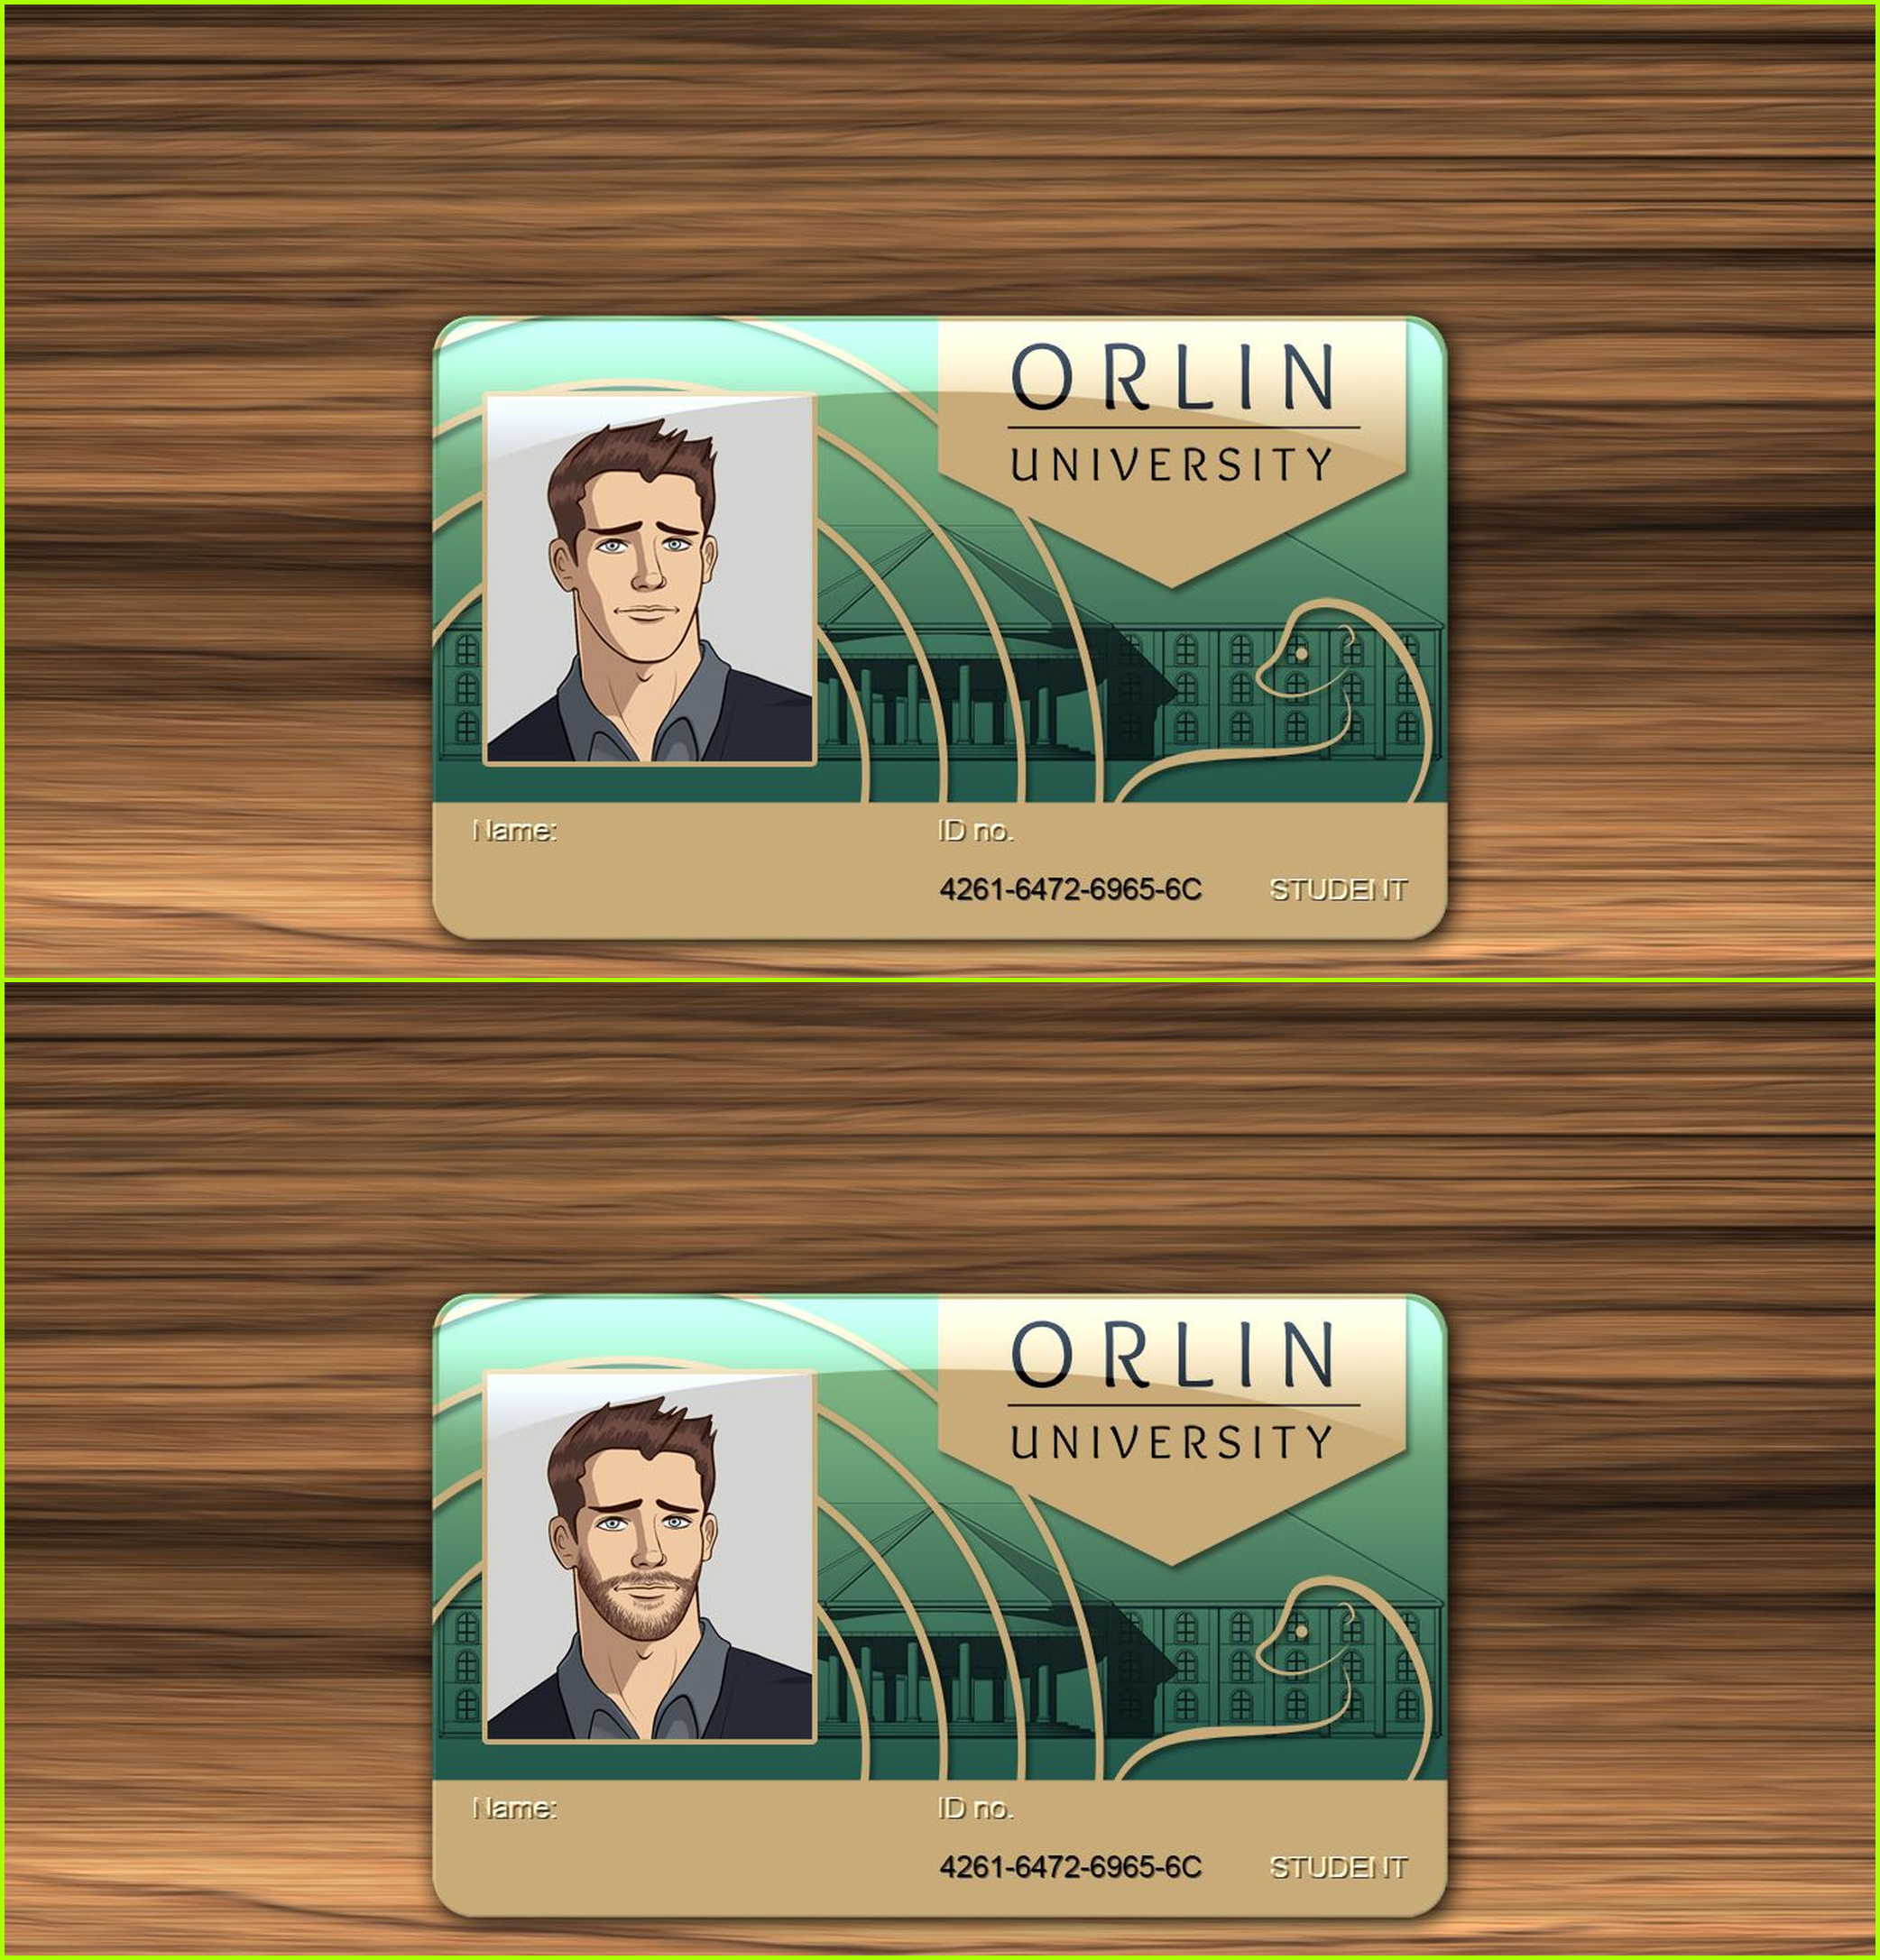 Coming Out on Top - Student ID Card